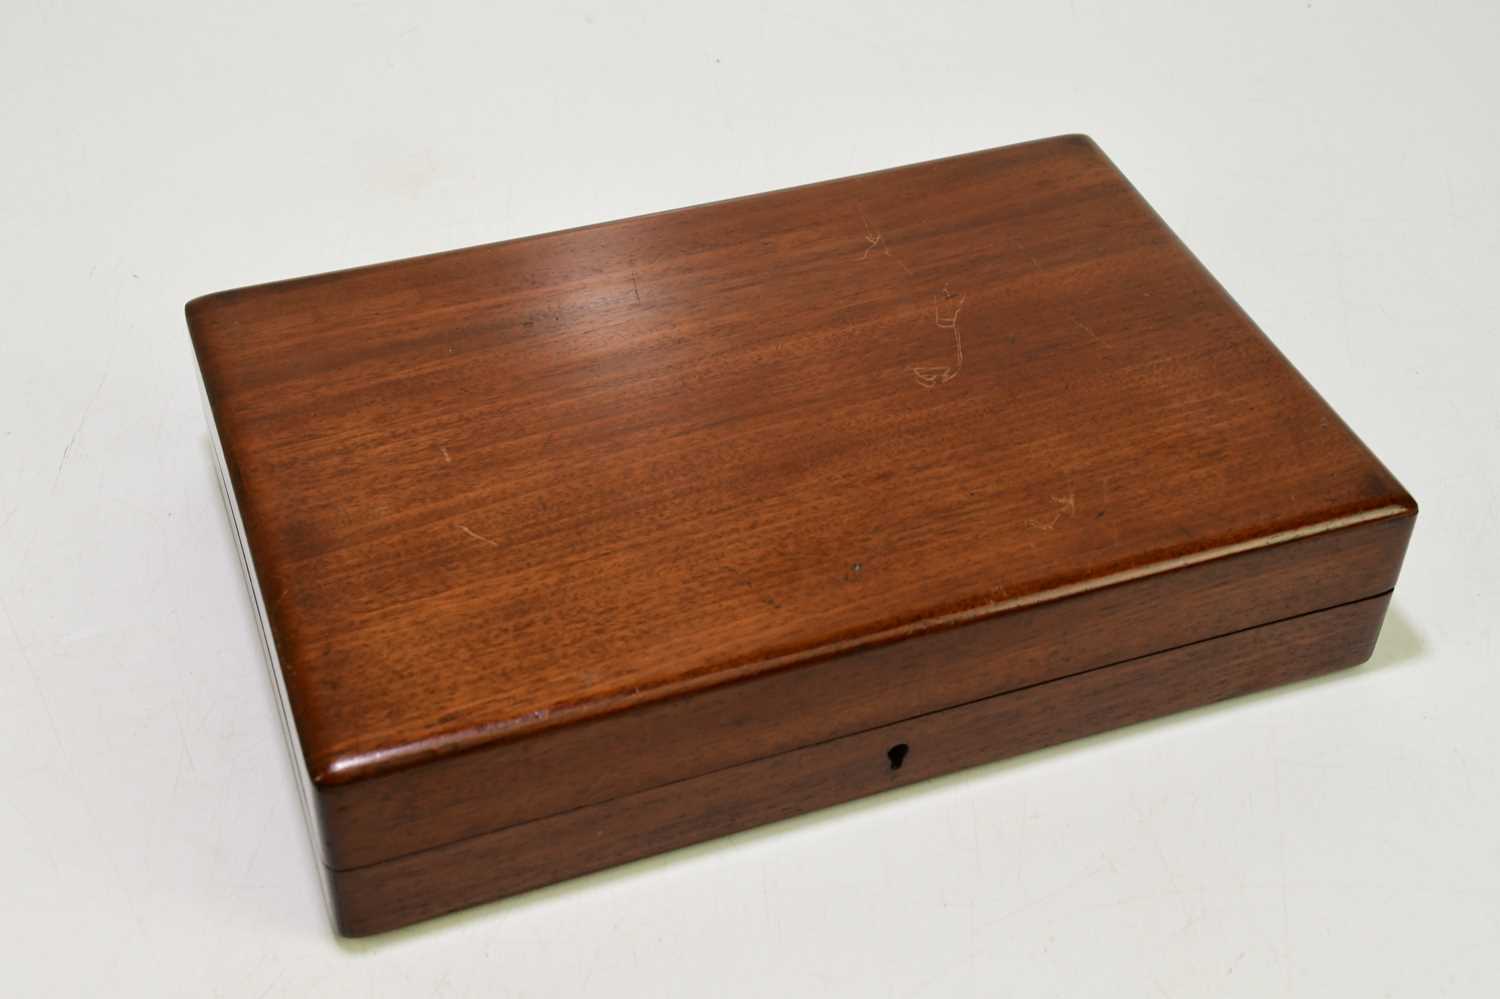 A 19th century mahogany silks spool sample box, possibly for a Macclesfield silks travelling - Image 2 of 3